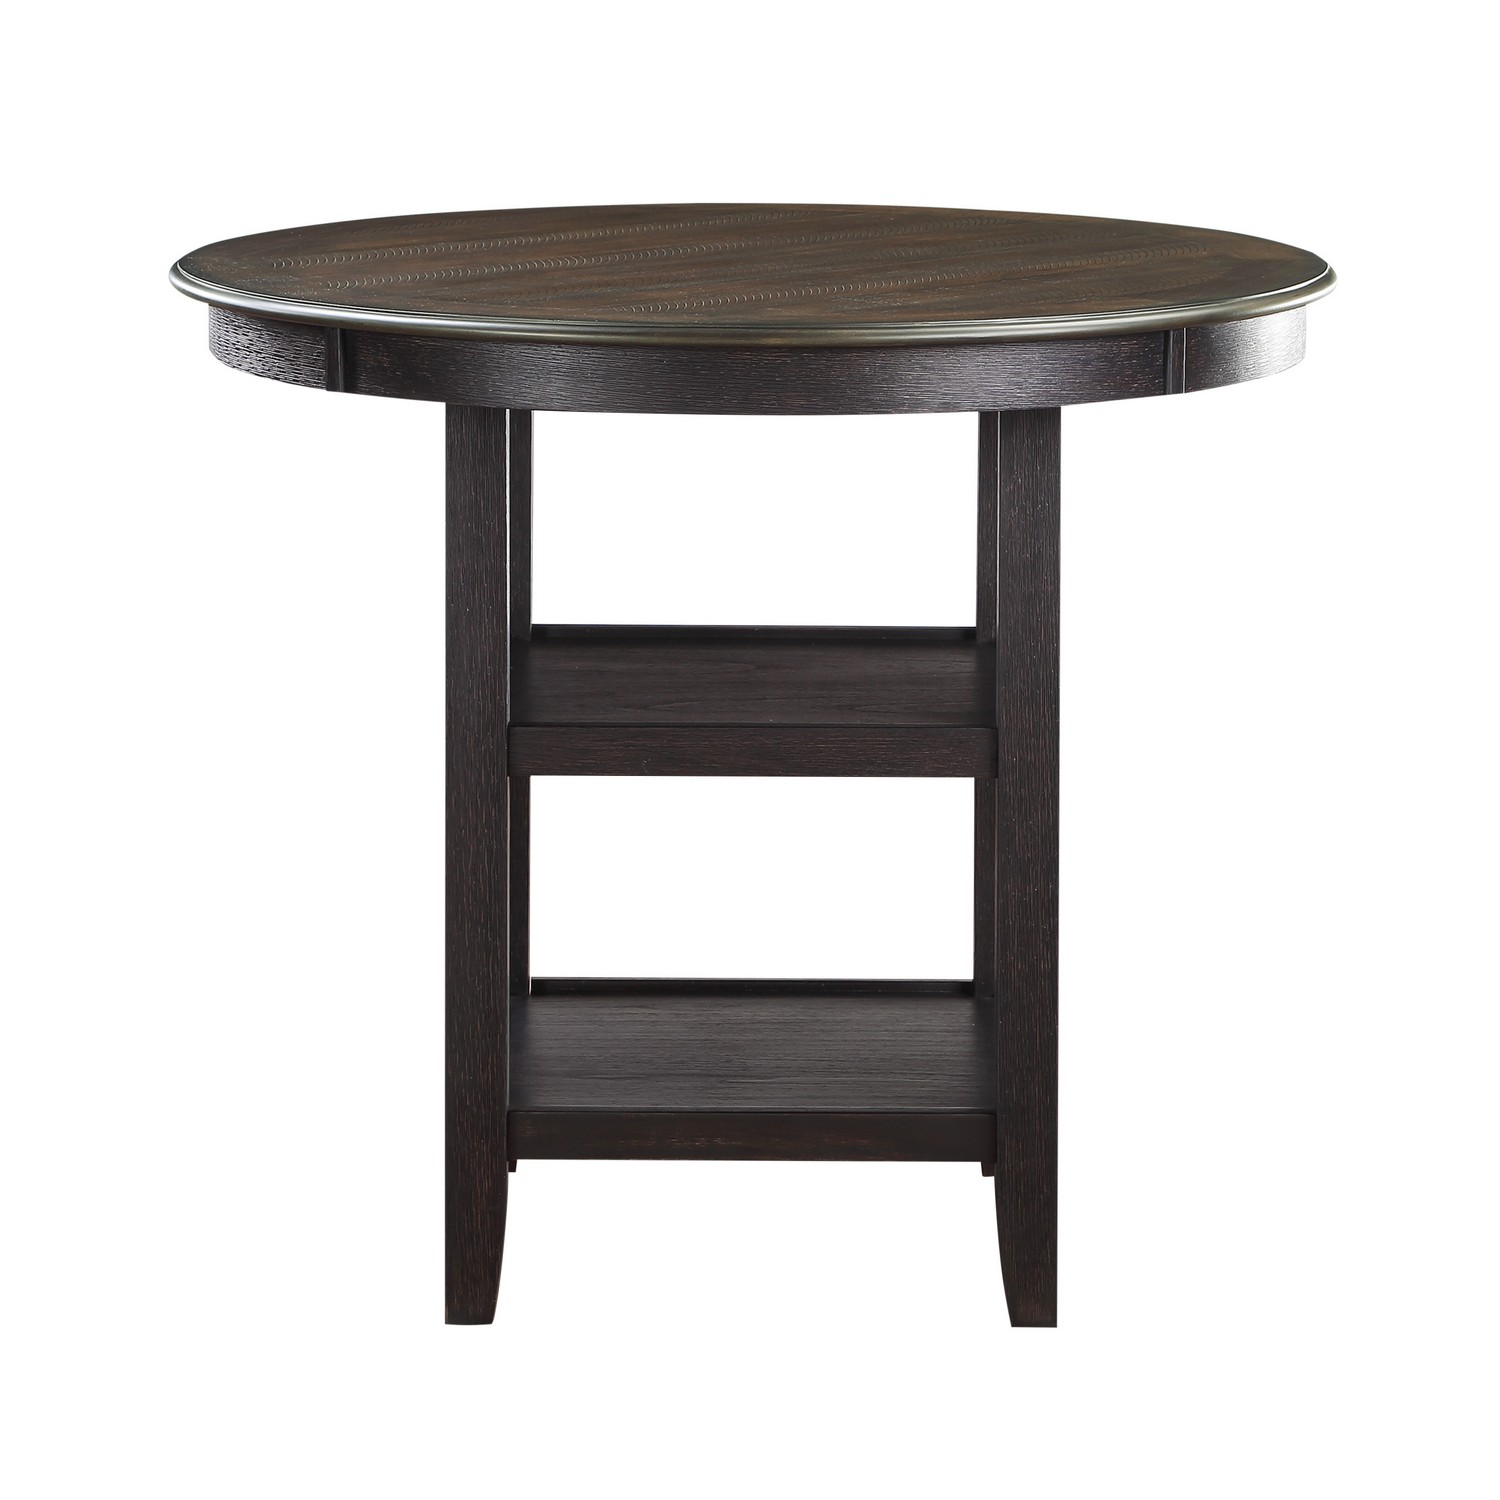 Homelegance Asher Counter Height Table - Brown/Black